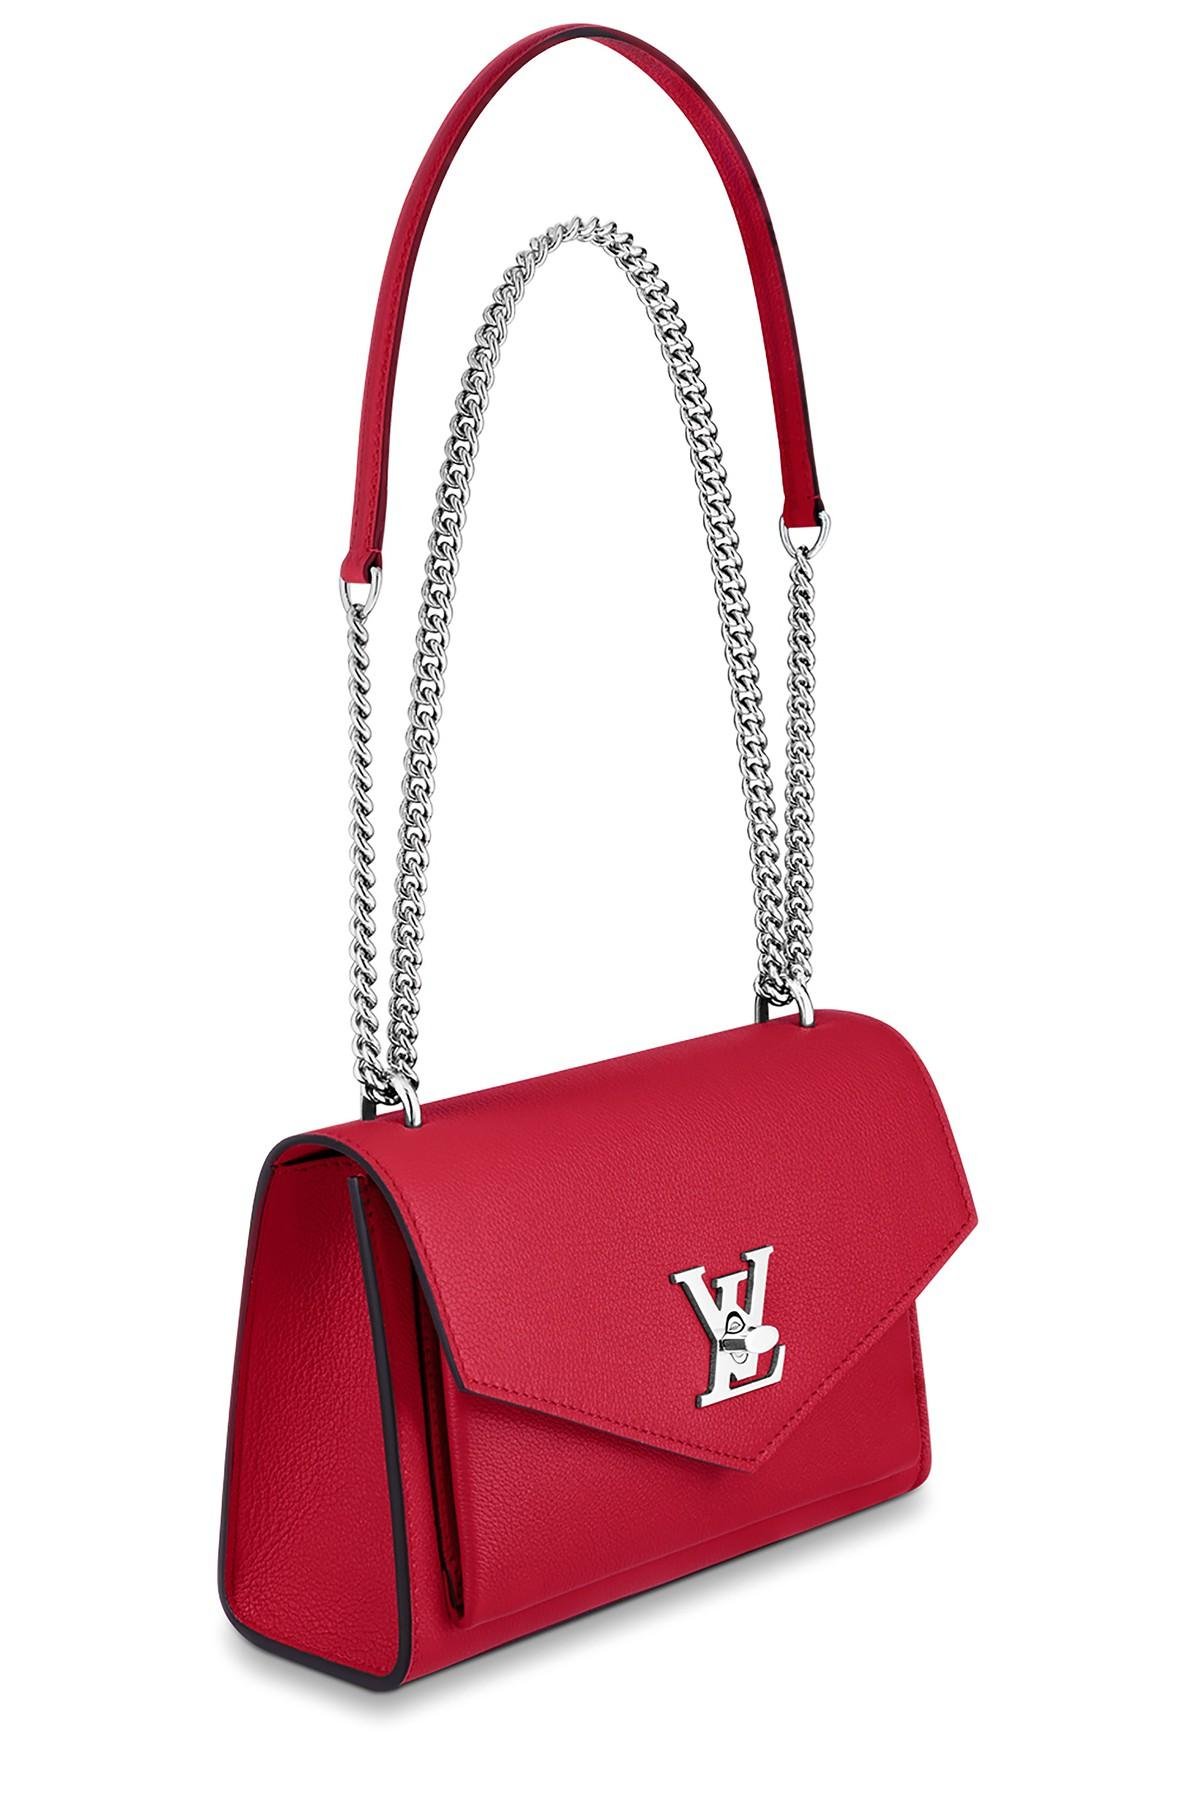 Vuitton Mylockme Chain Bag in Red |